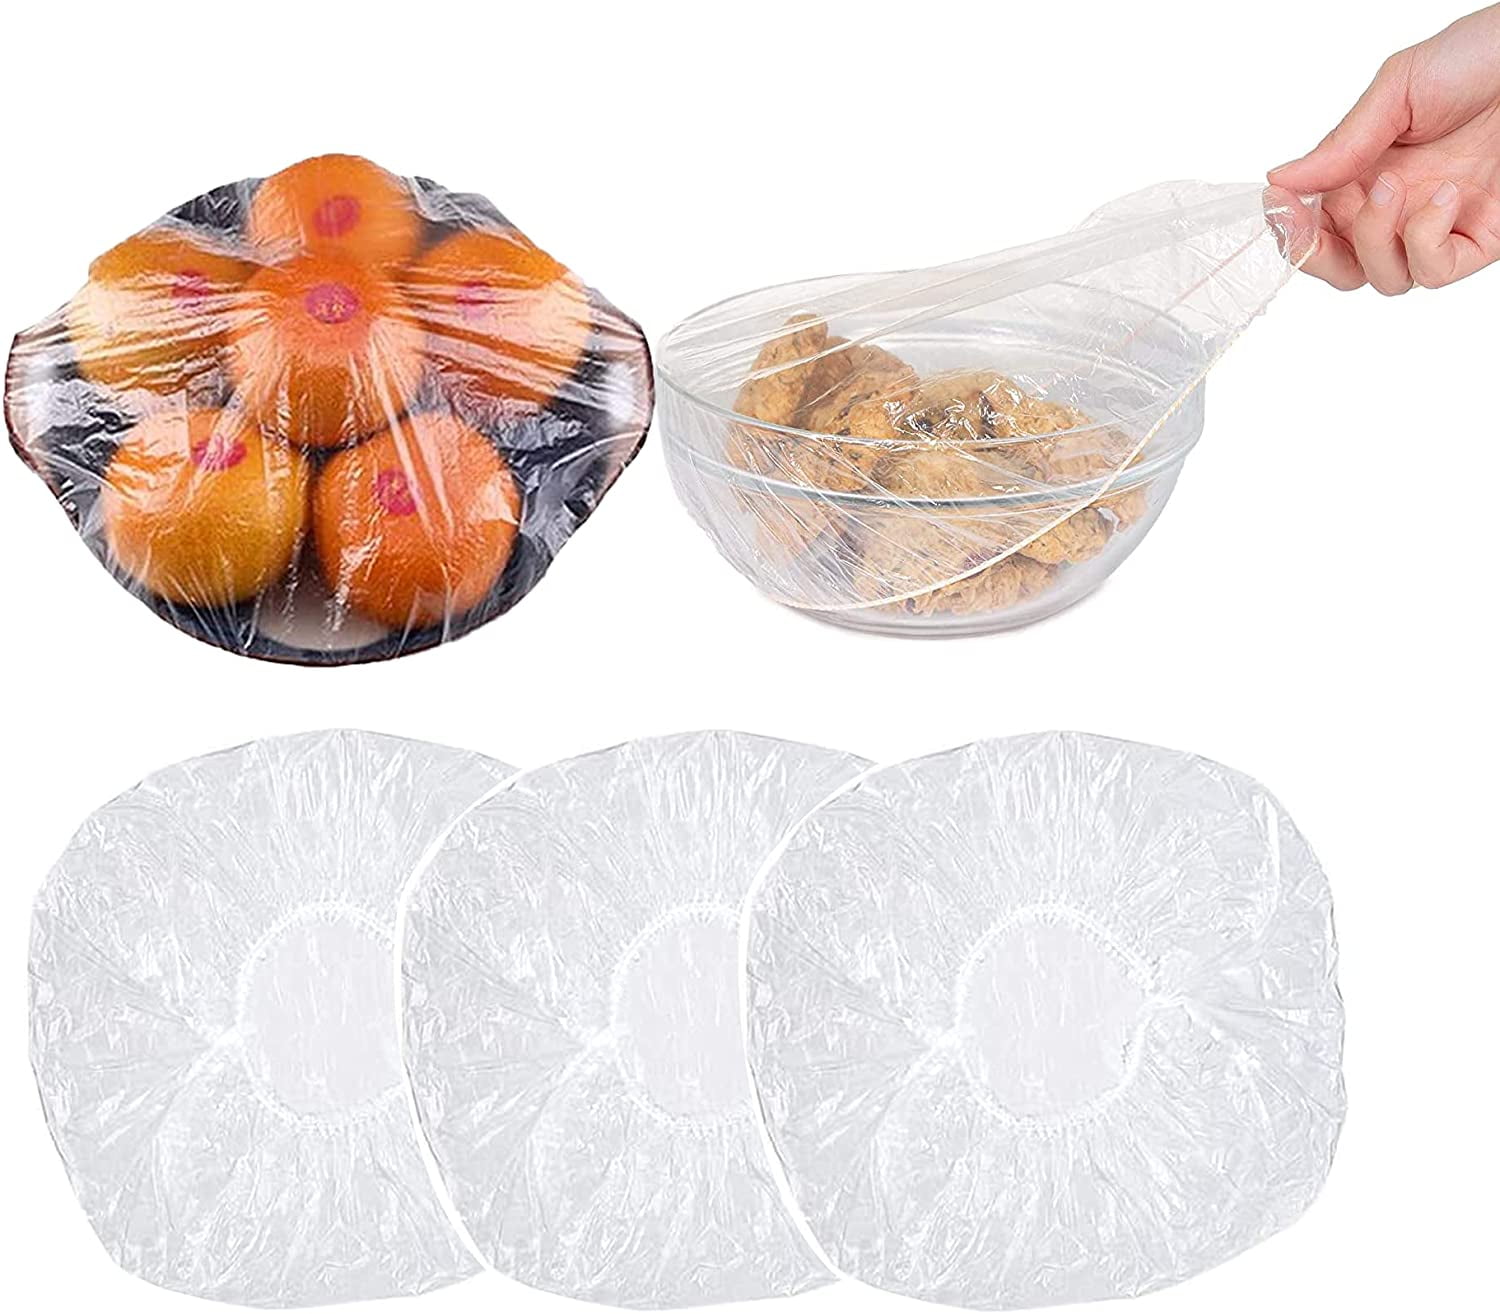 Clear Large Plastic 26cm Food Cover With Steam Vent, Handle